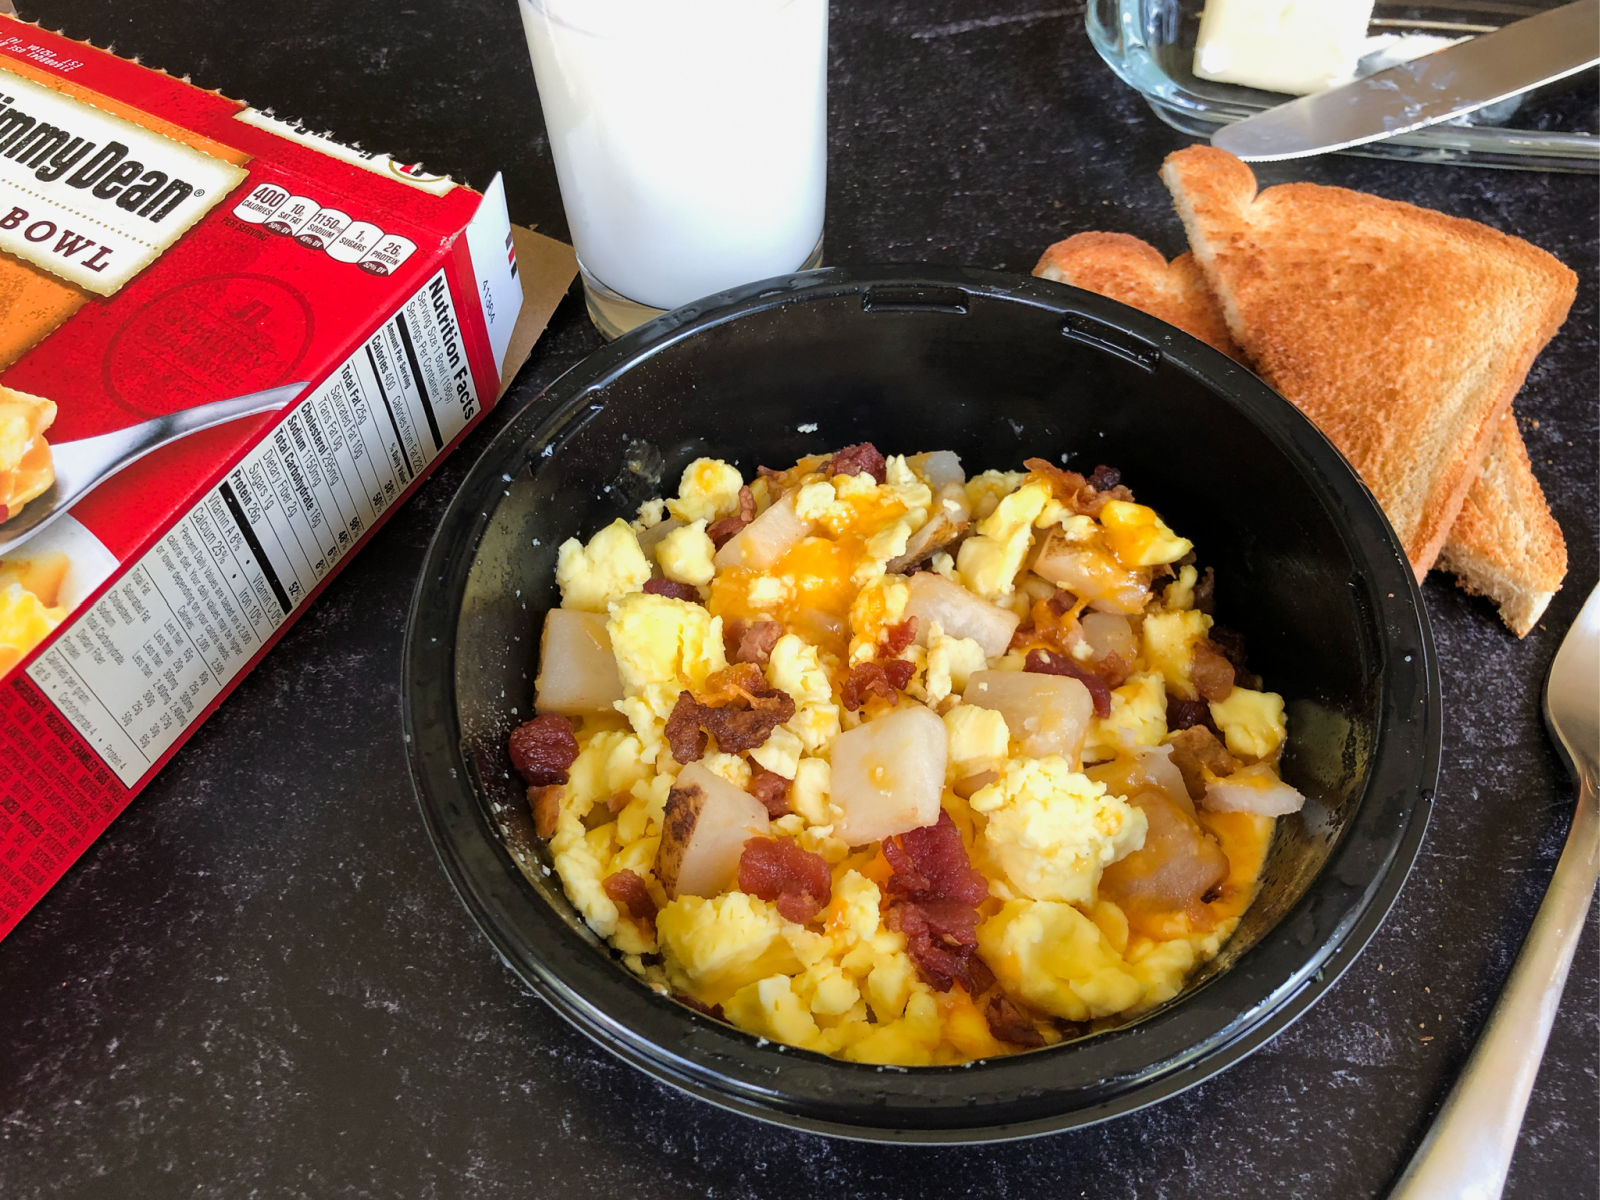 Jimmy Dean & Wright Brand Have Your Breakfast Needs Covered! on I Heart Publix 2